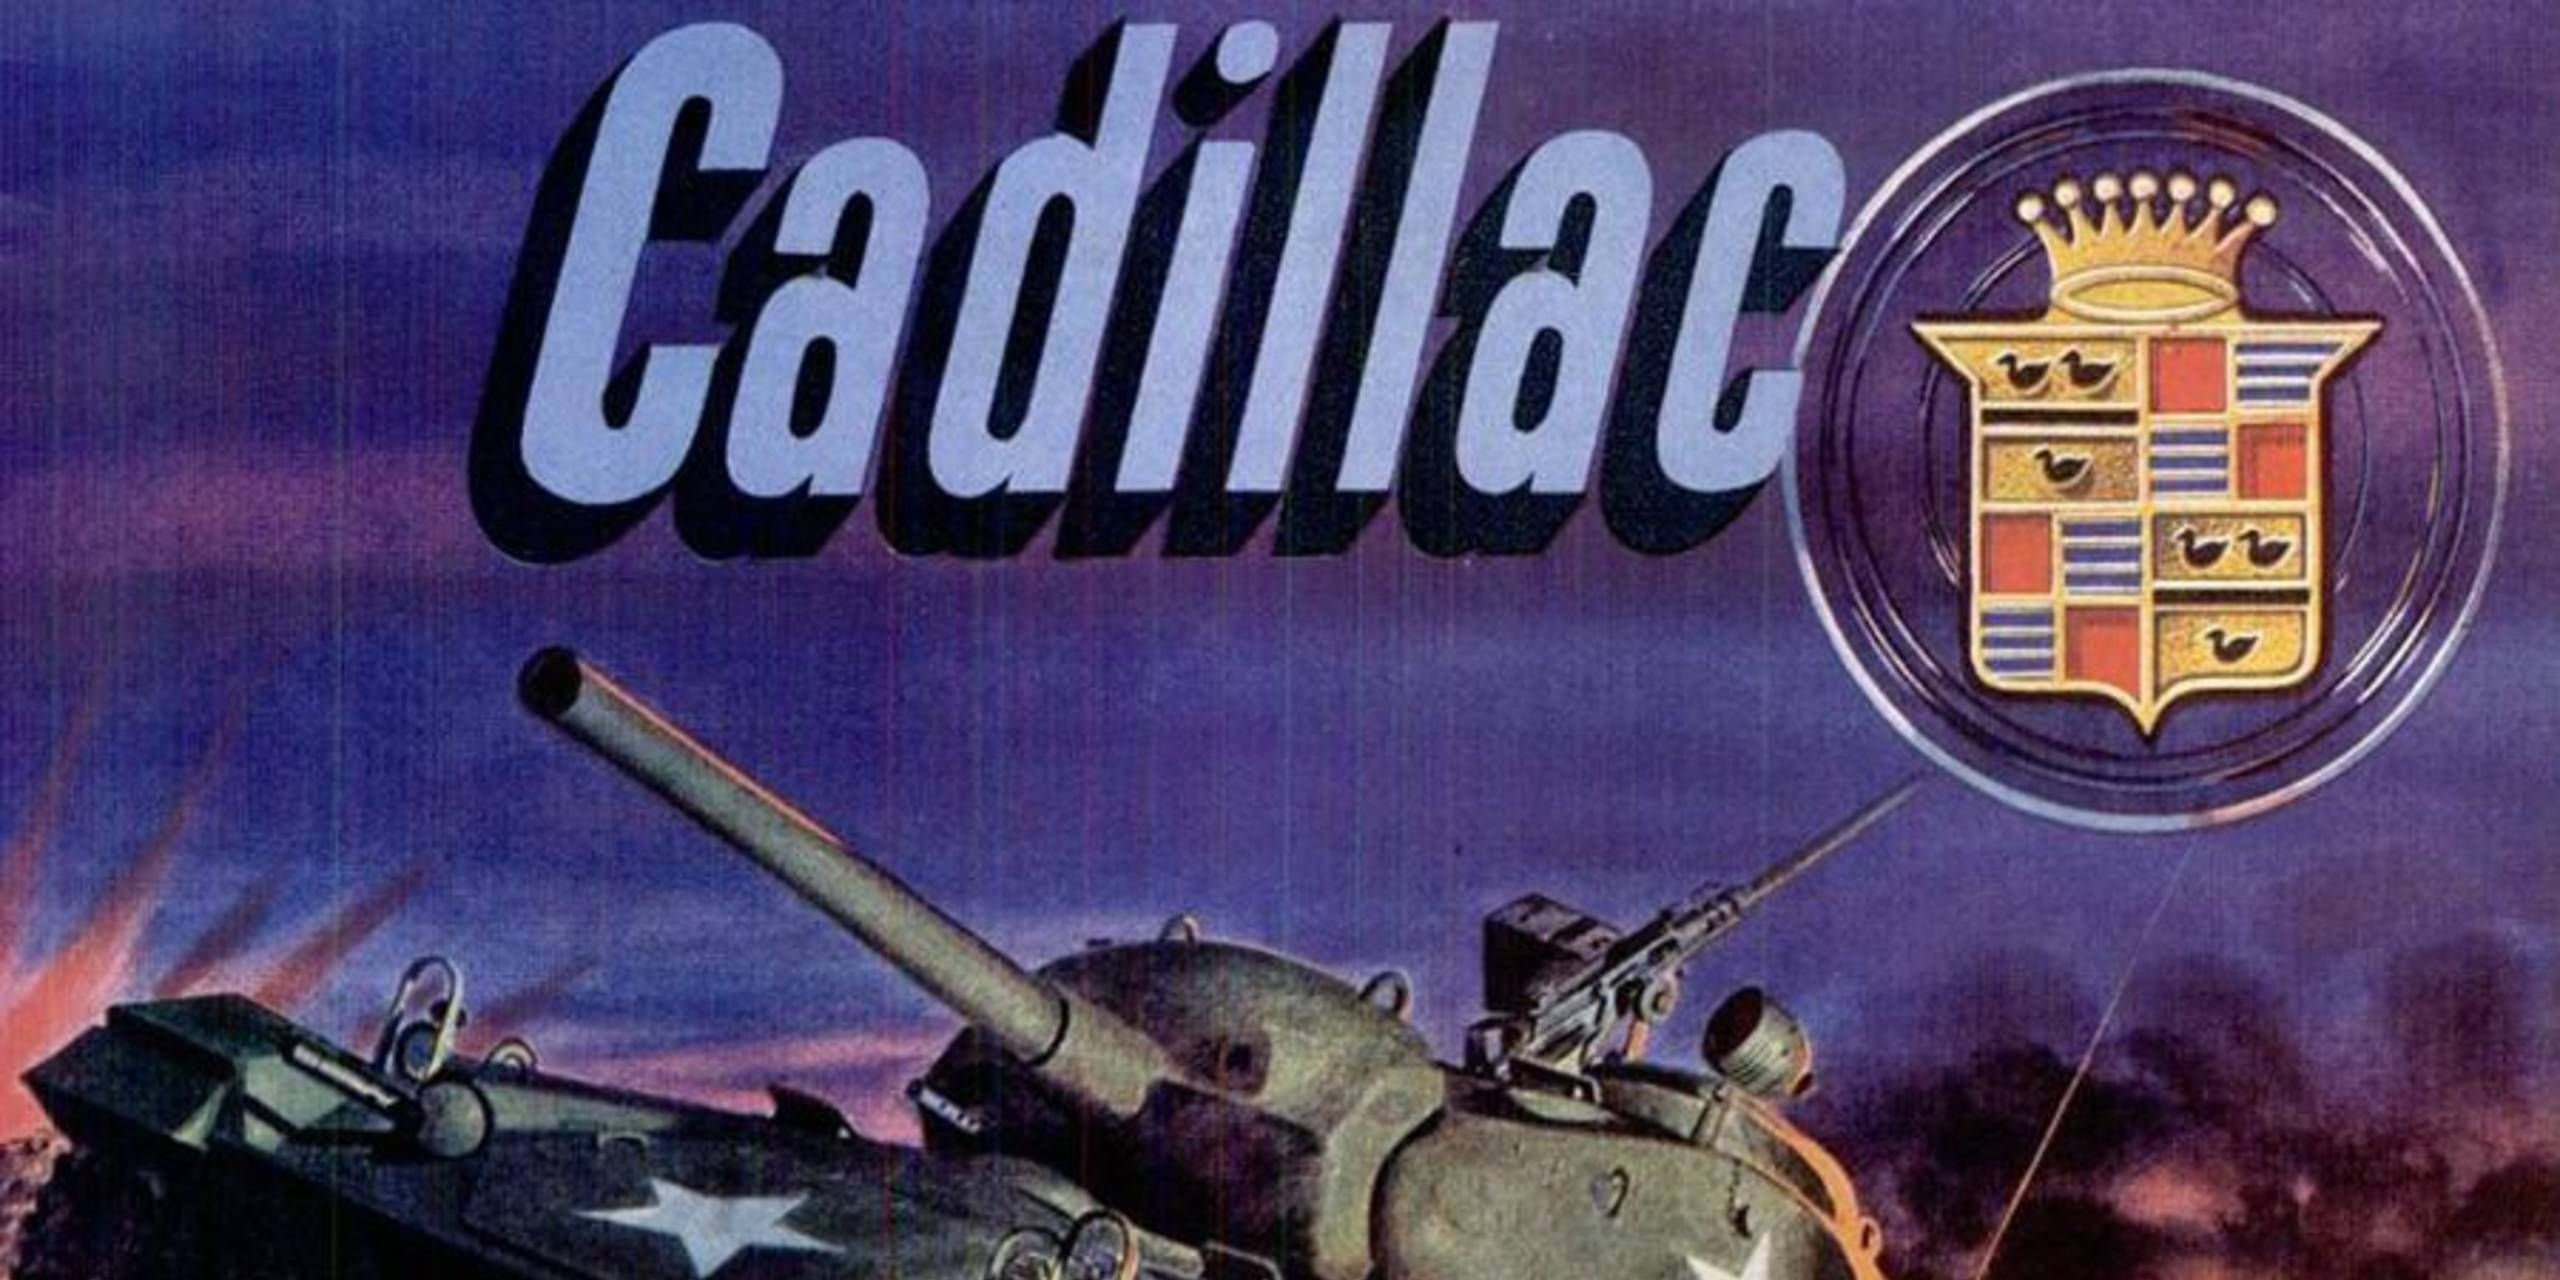 Patriotic Ads: Cadillac Goes to War